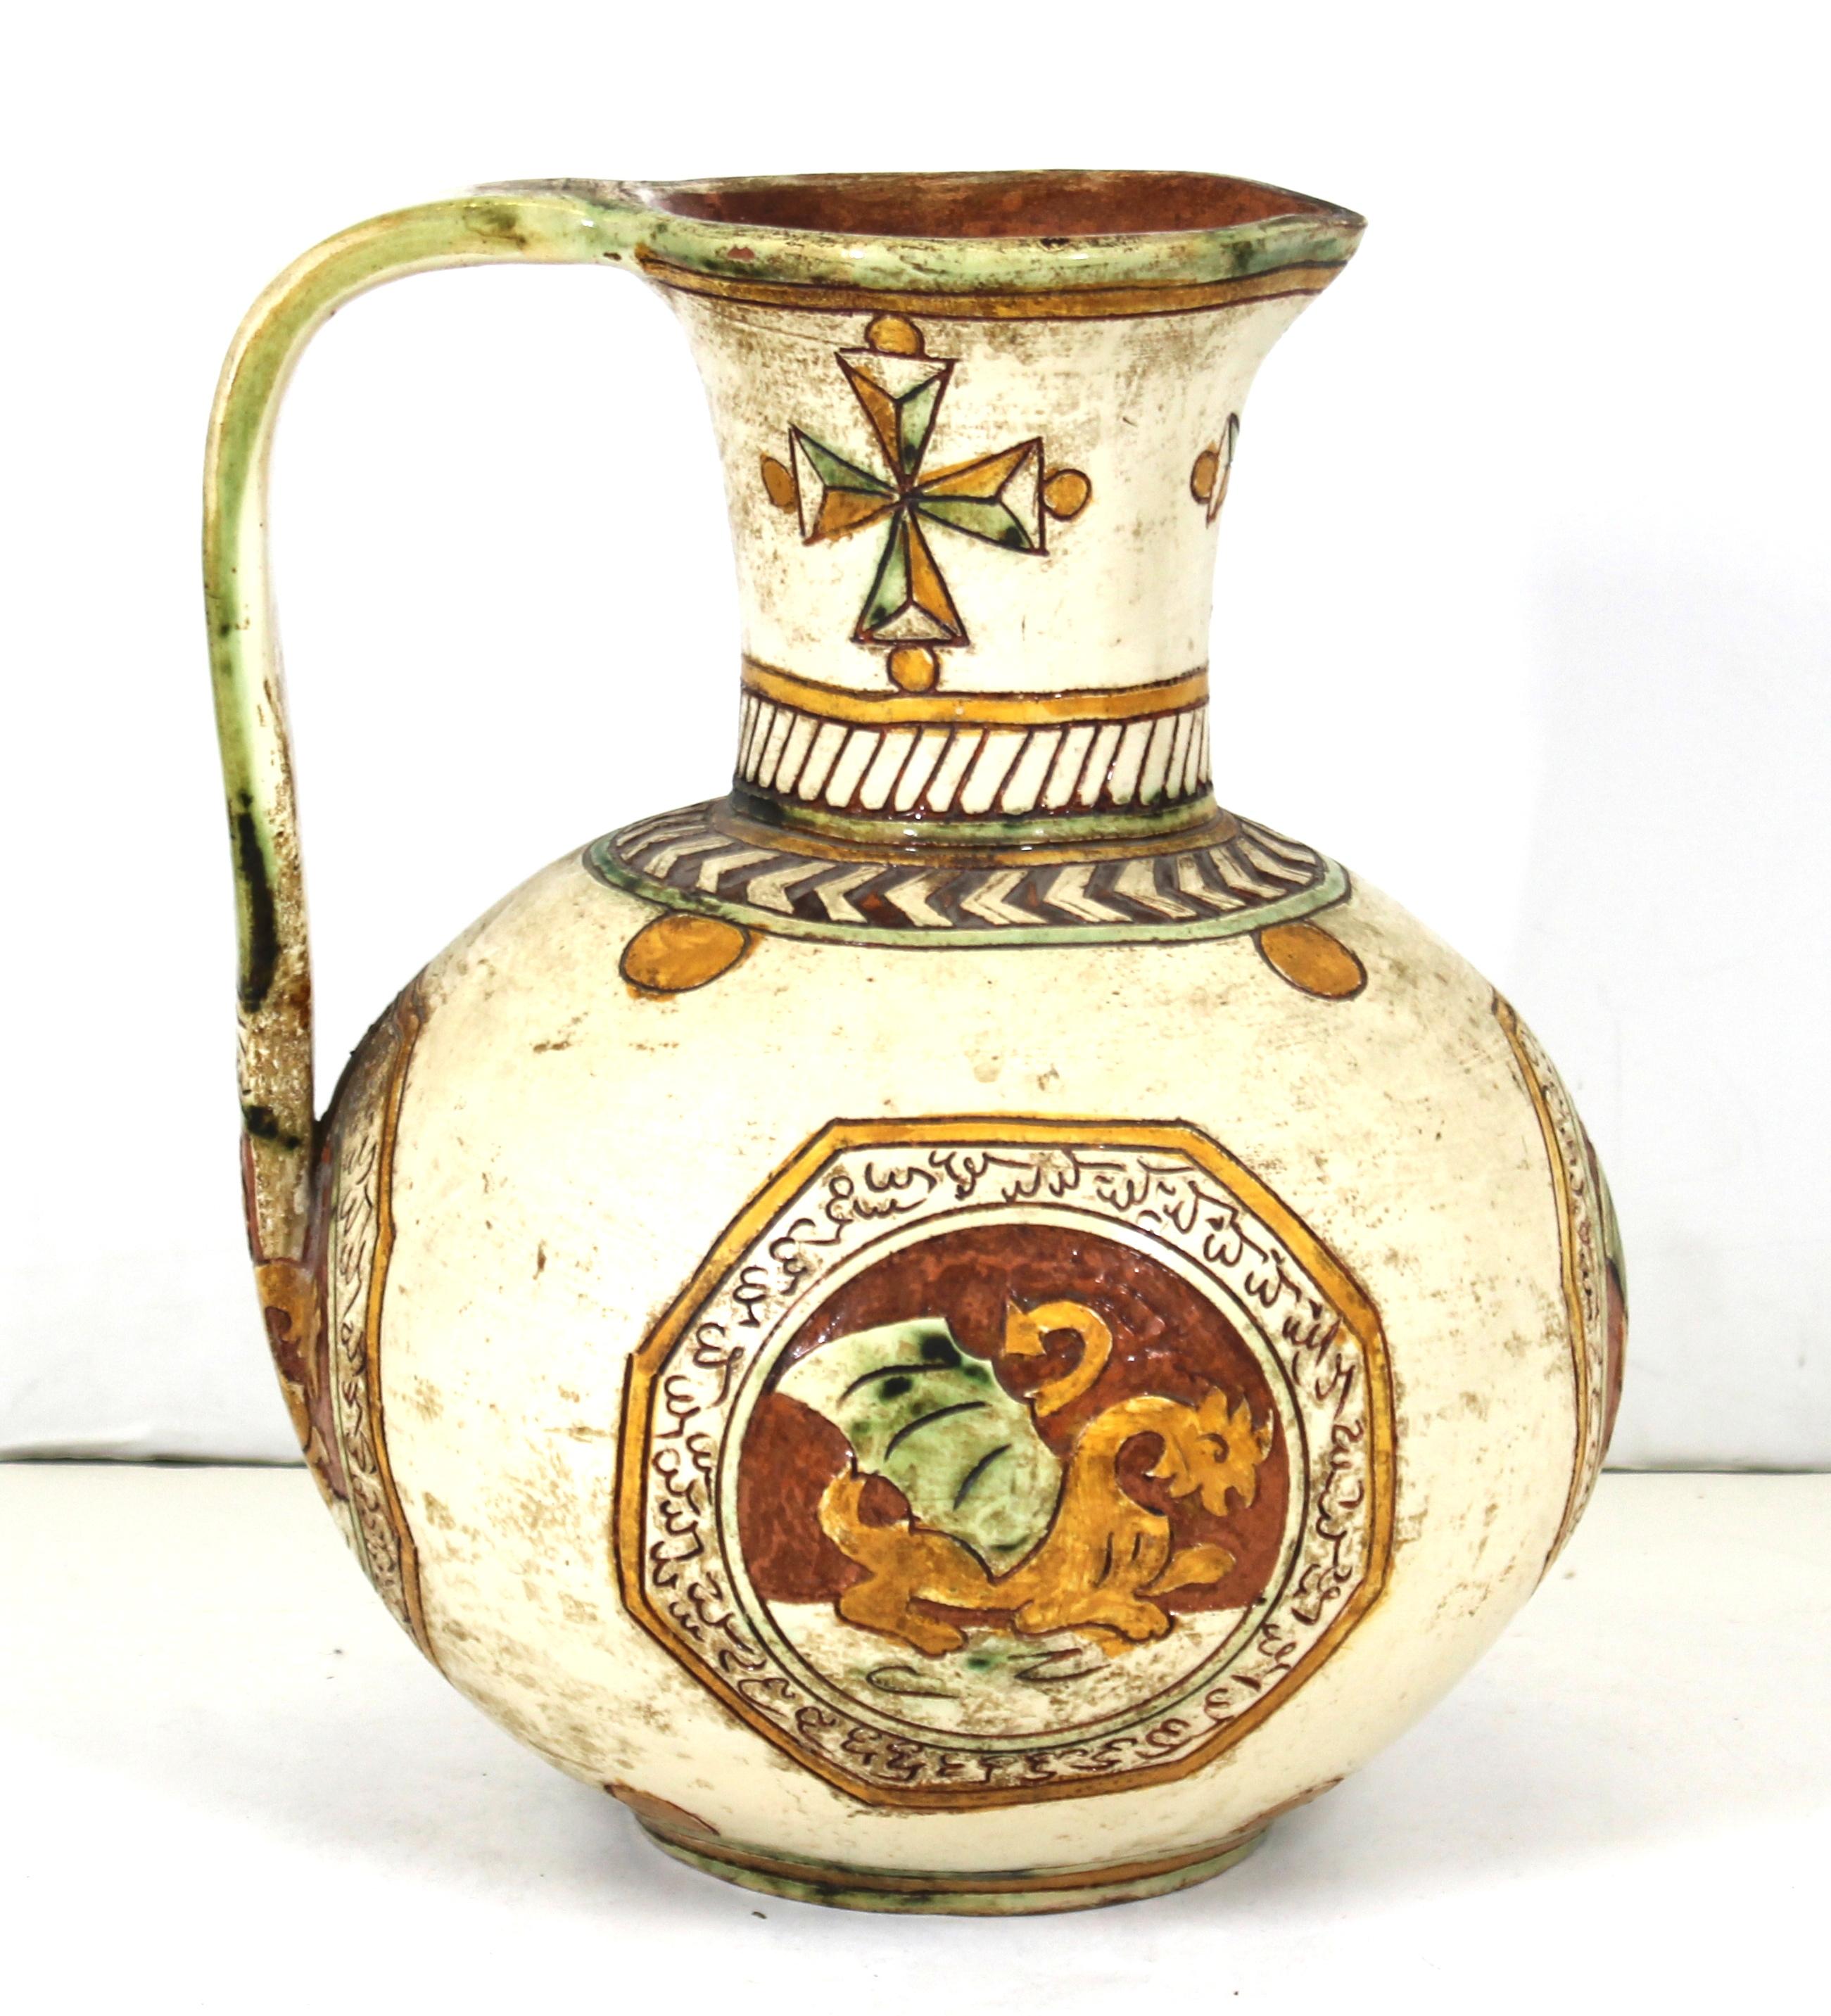 Italian Renaissance Revival ceramic pitcher with sgraffito decor of Maltese crosses on the neck and medallions depicting dragons. Made in Italy during the 1900s, this piece is in remarkable antique condition with age-appropriate wear and use.